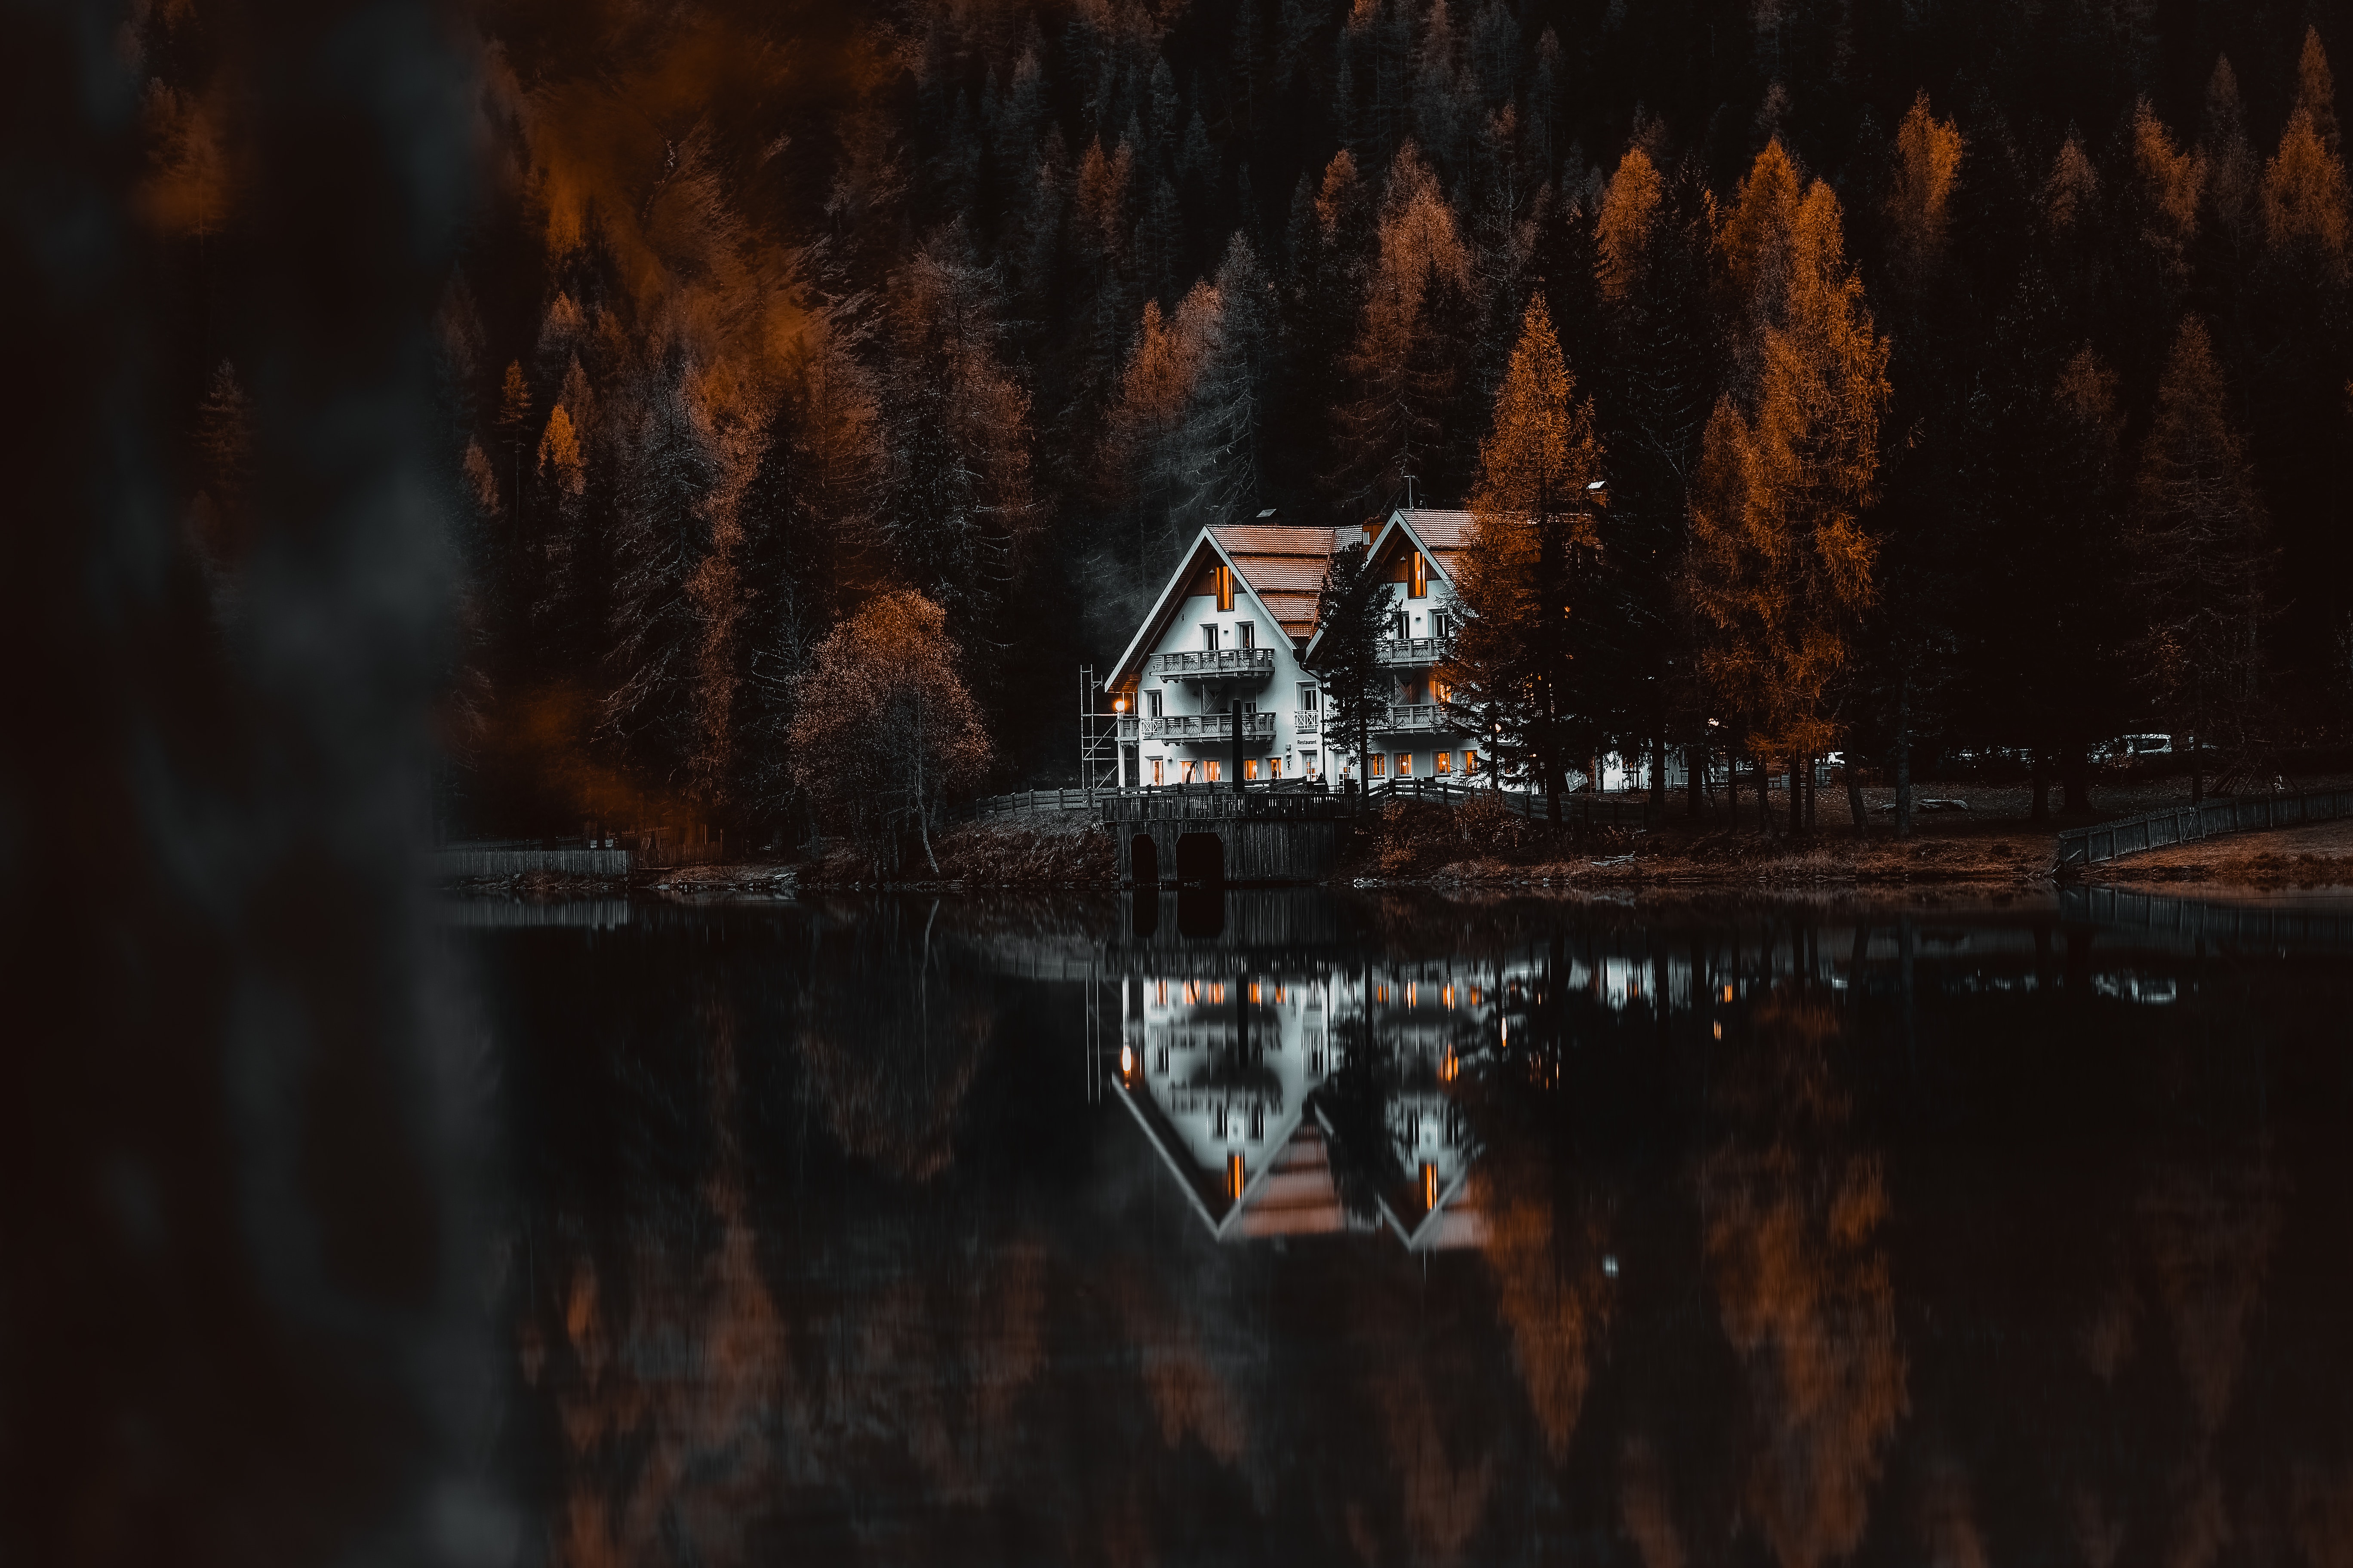 shore, houses, lake, small houses, forest, nature, bank